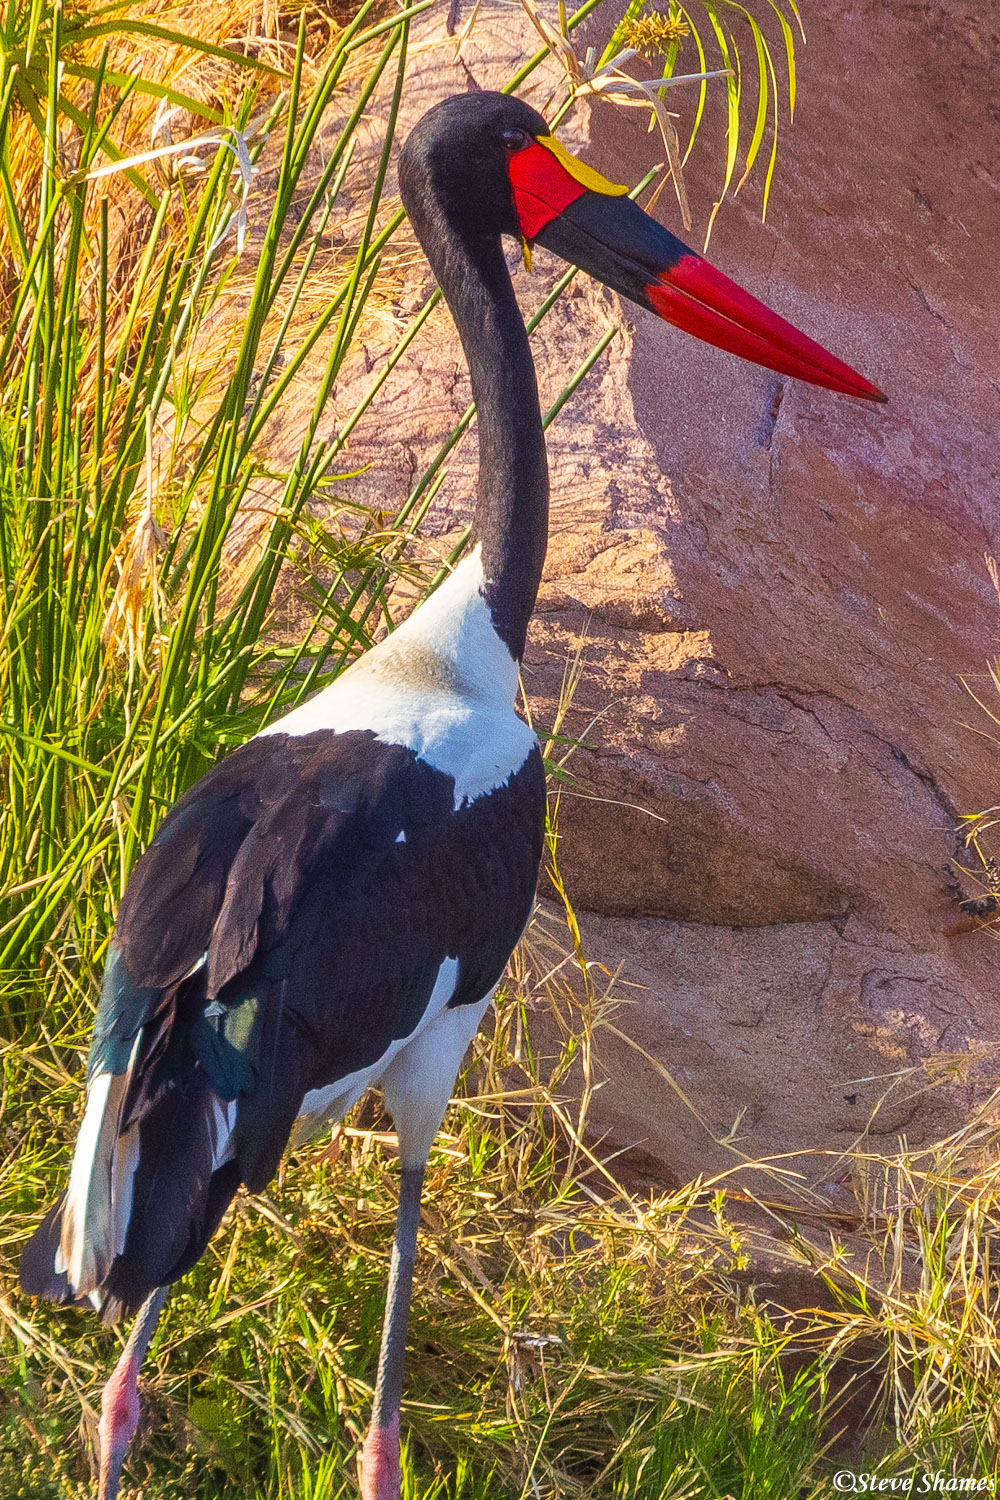 These saddle billed storks have about the most colorful beaks. Vivid red and yellow.